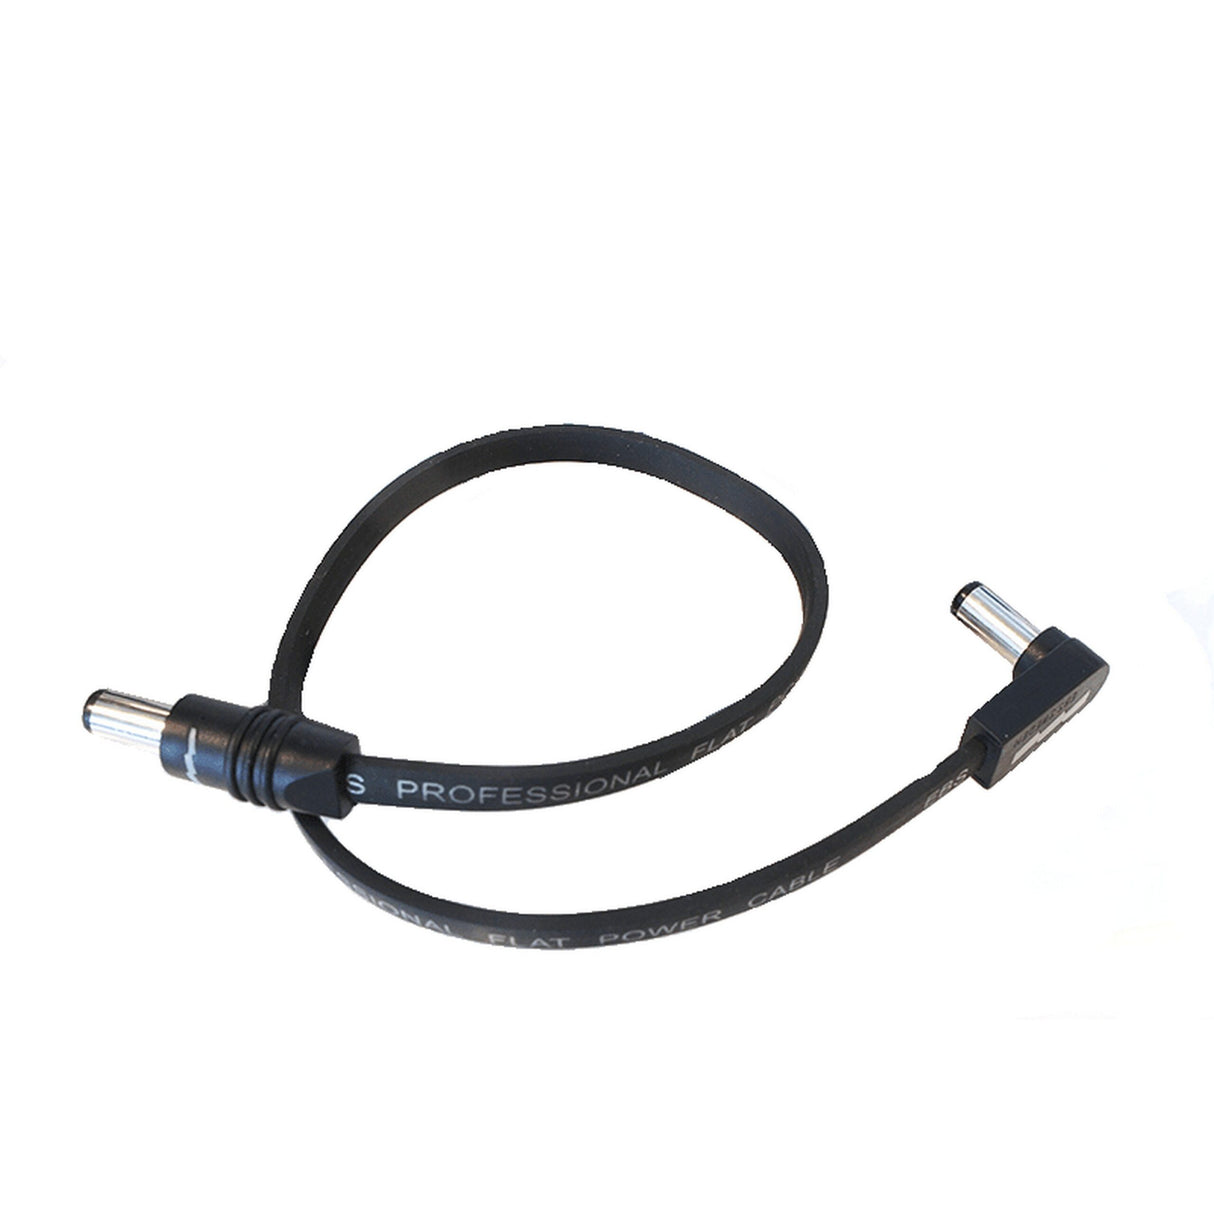 EBS DC1-28 90/90 Flat Power Cable, 28 Centimeters